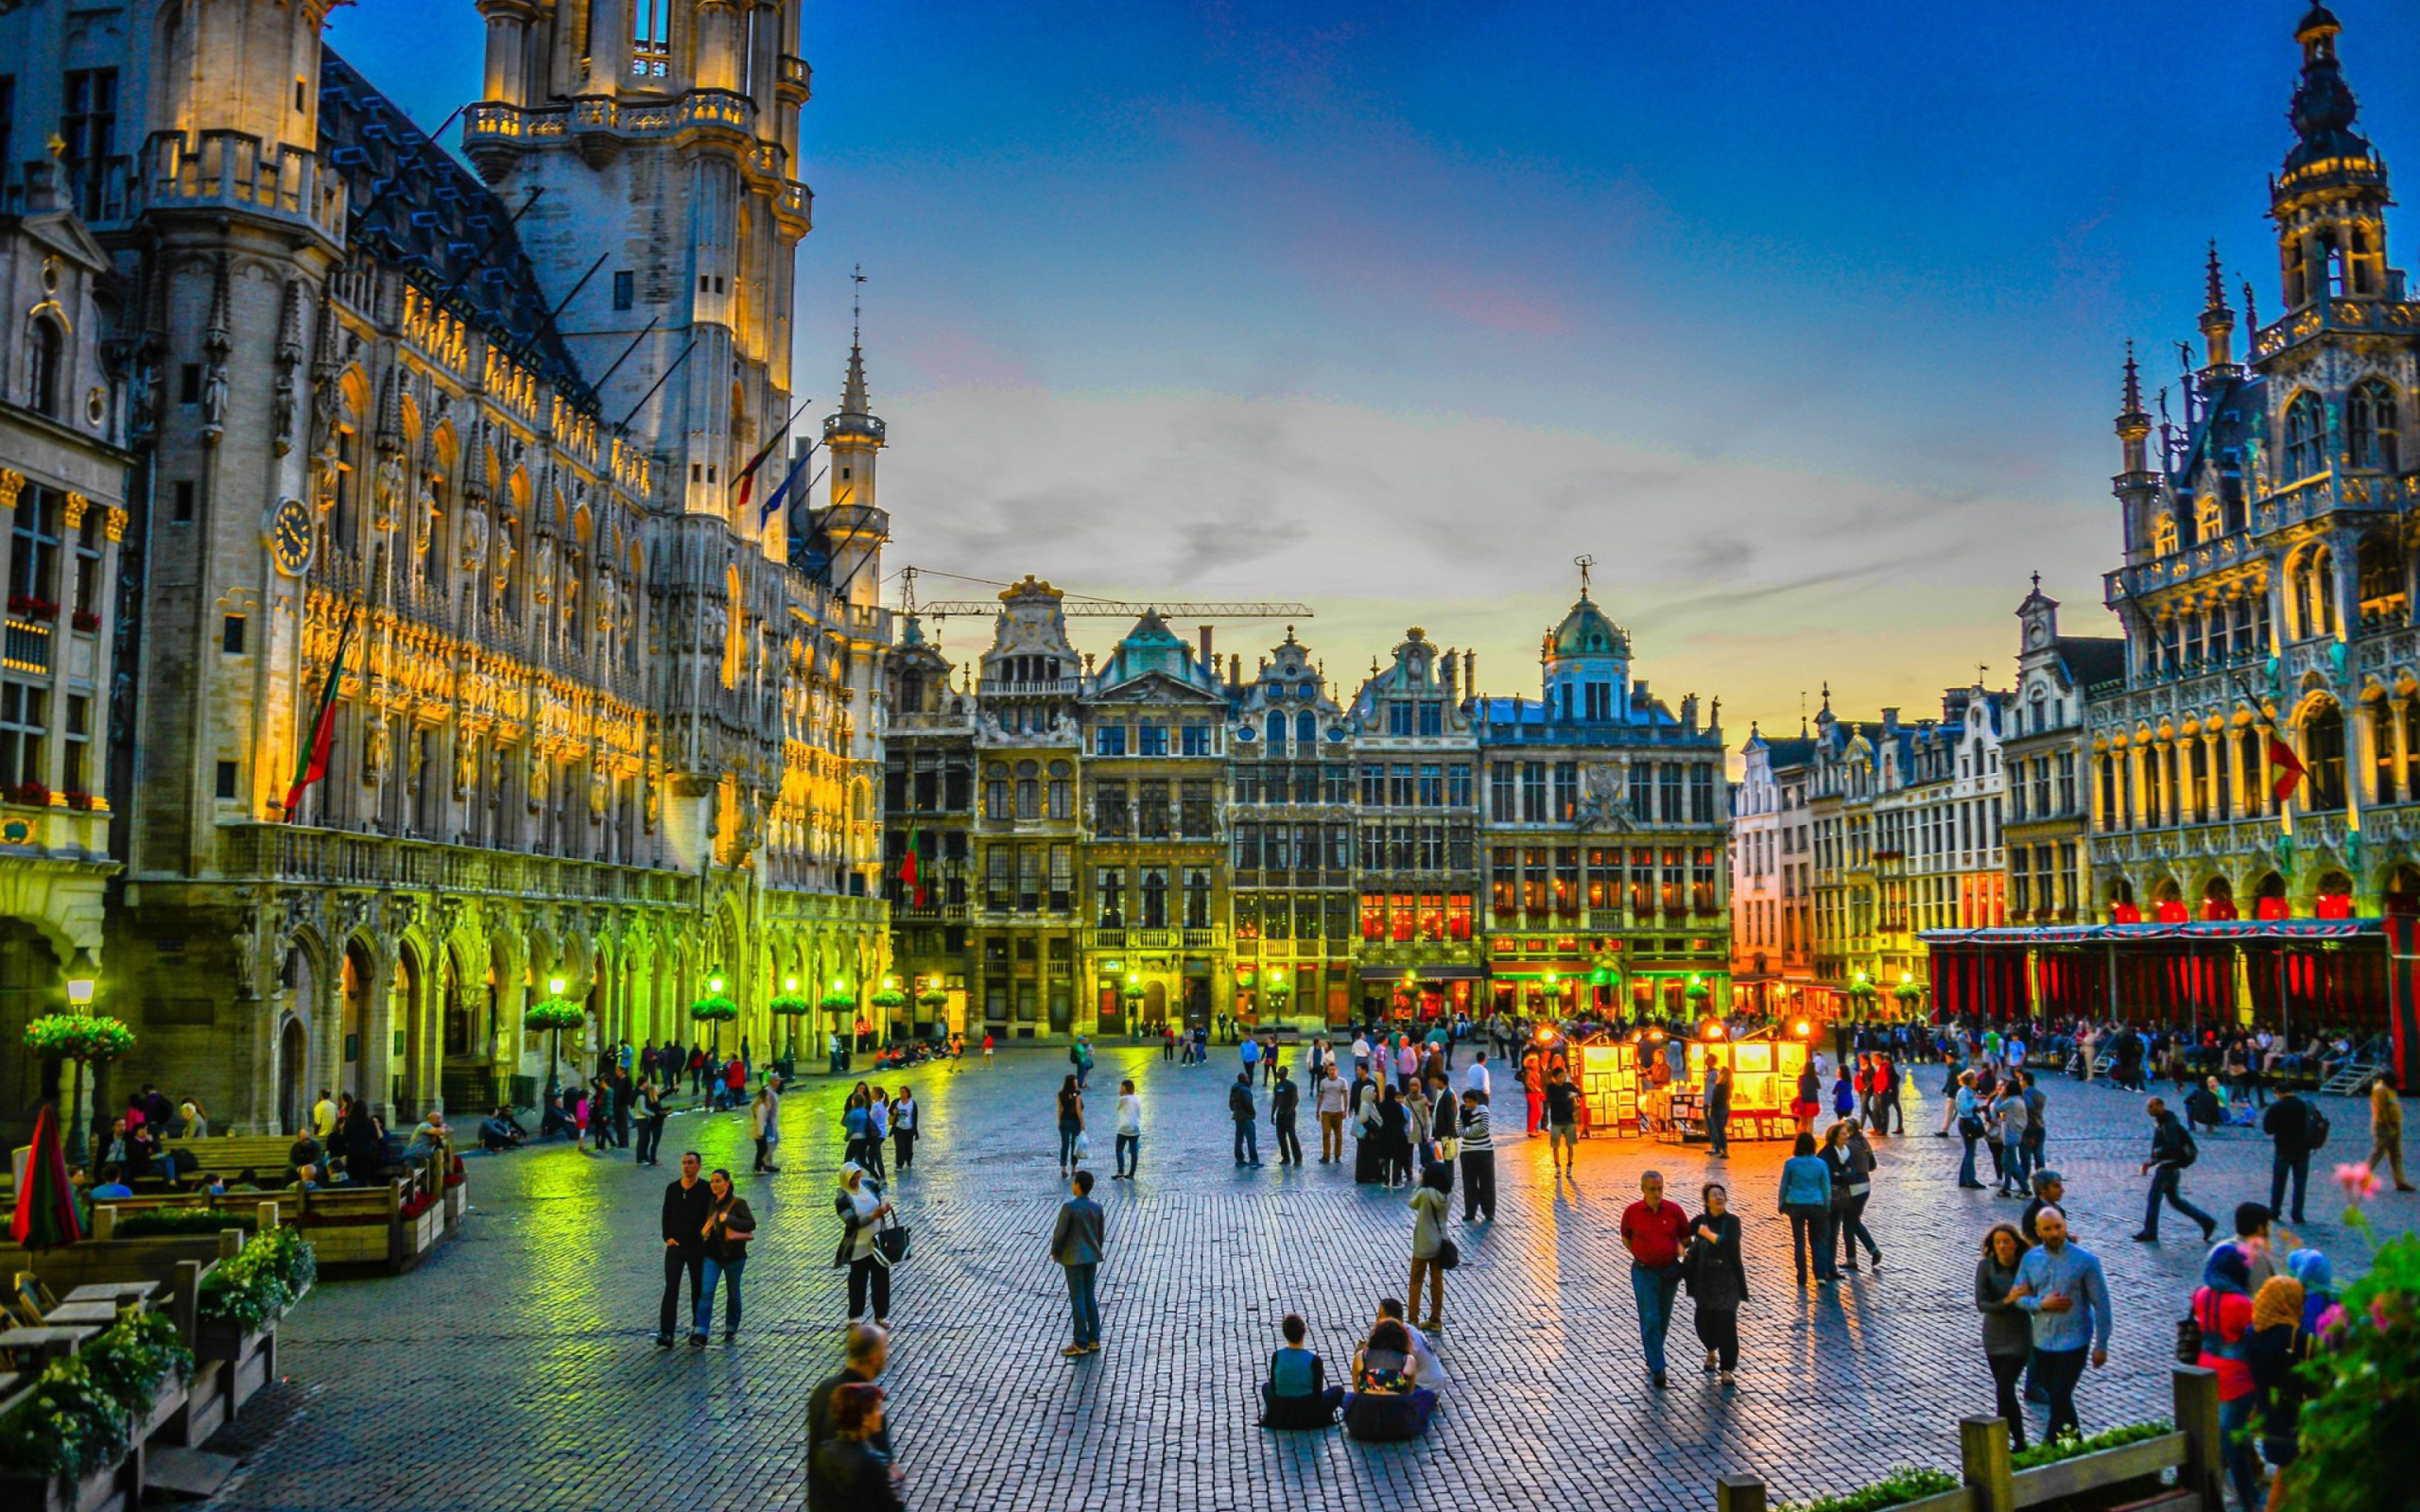 Das Grand place by night in Brussels Wallpaper 2560x1600